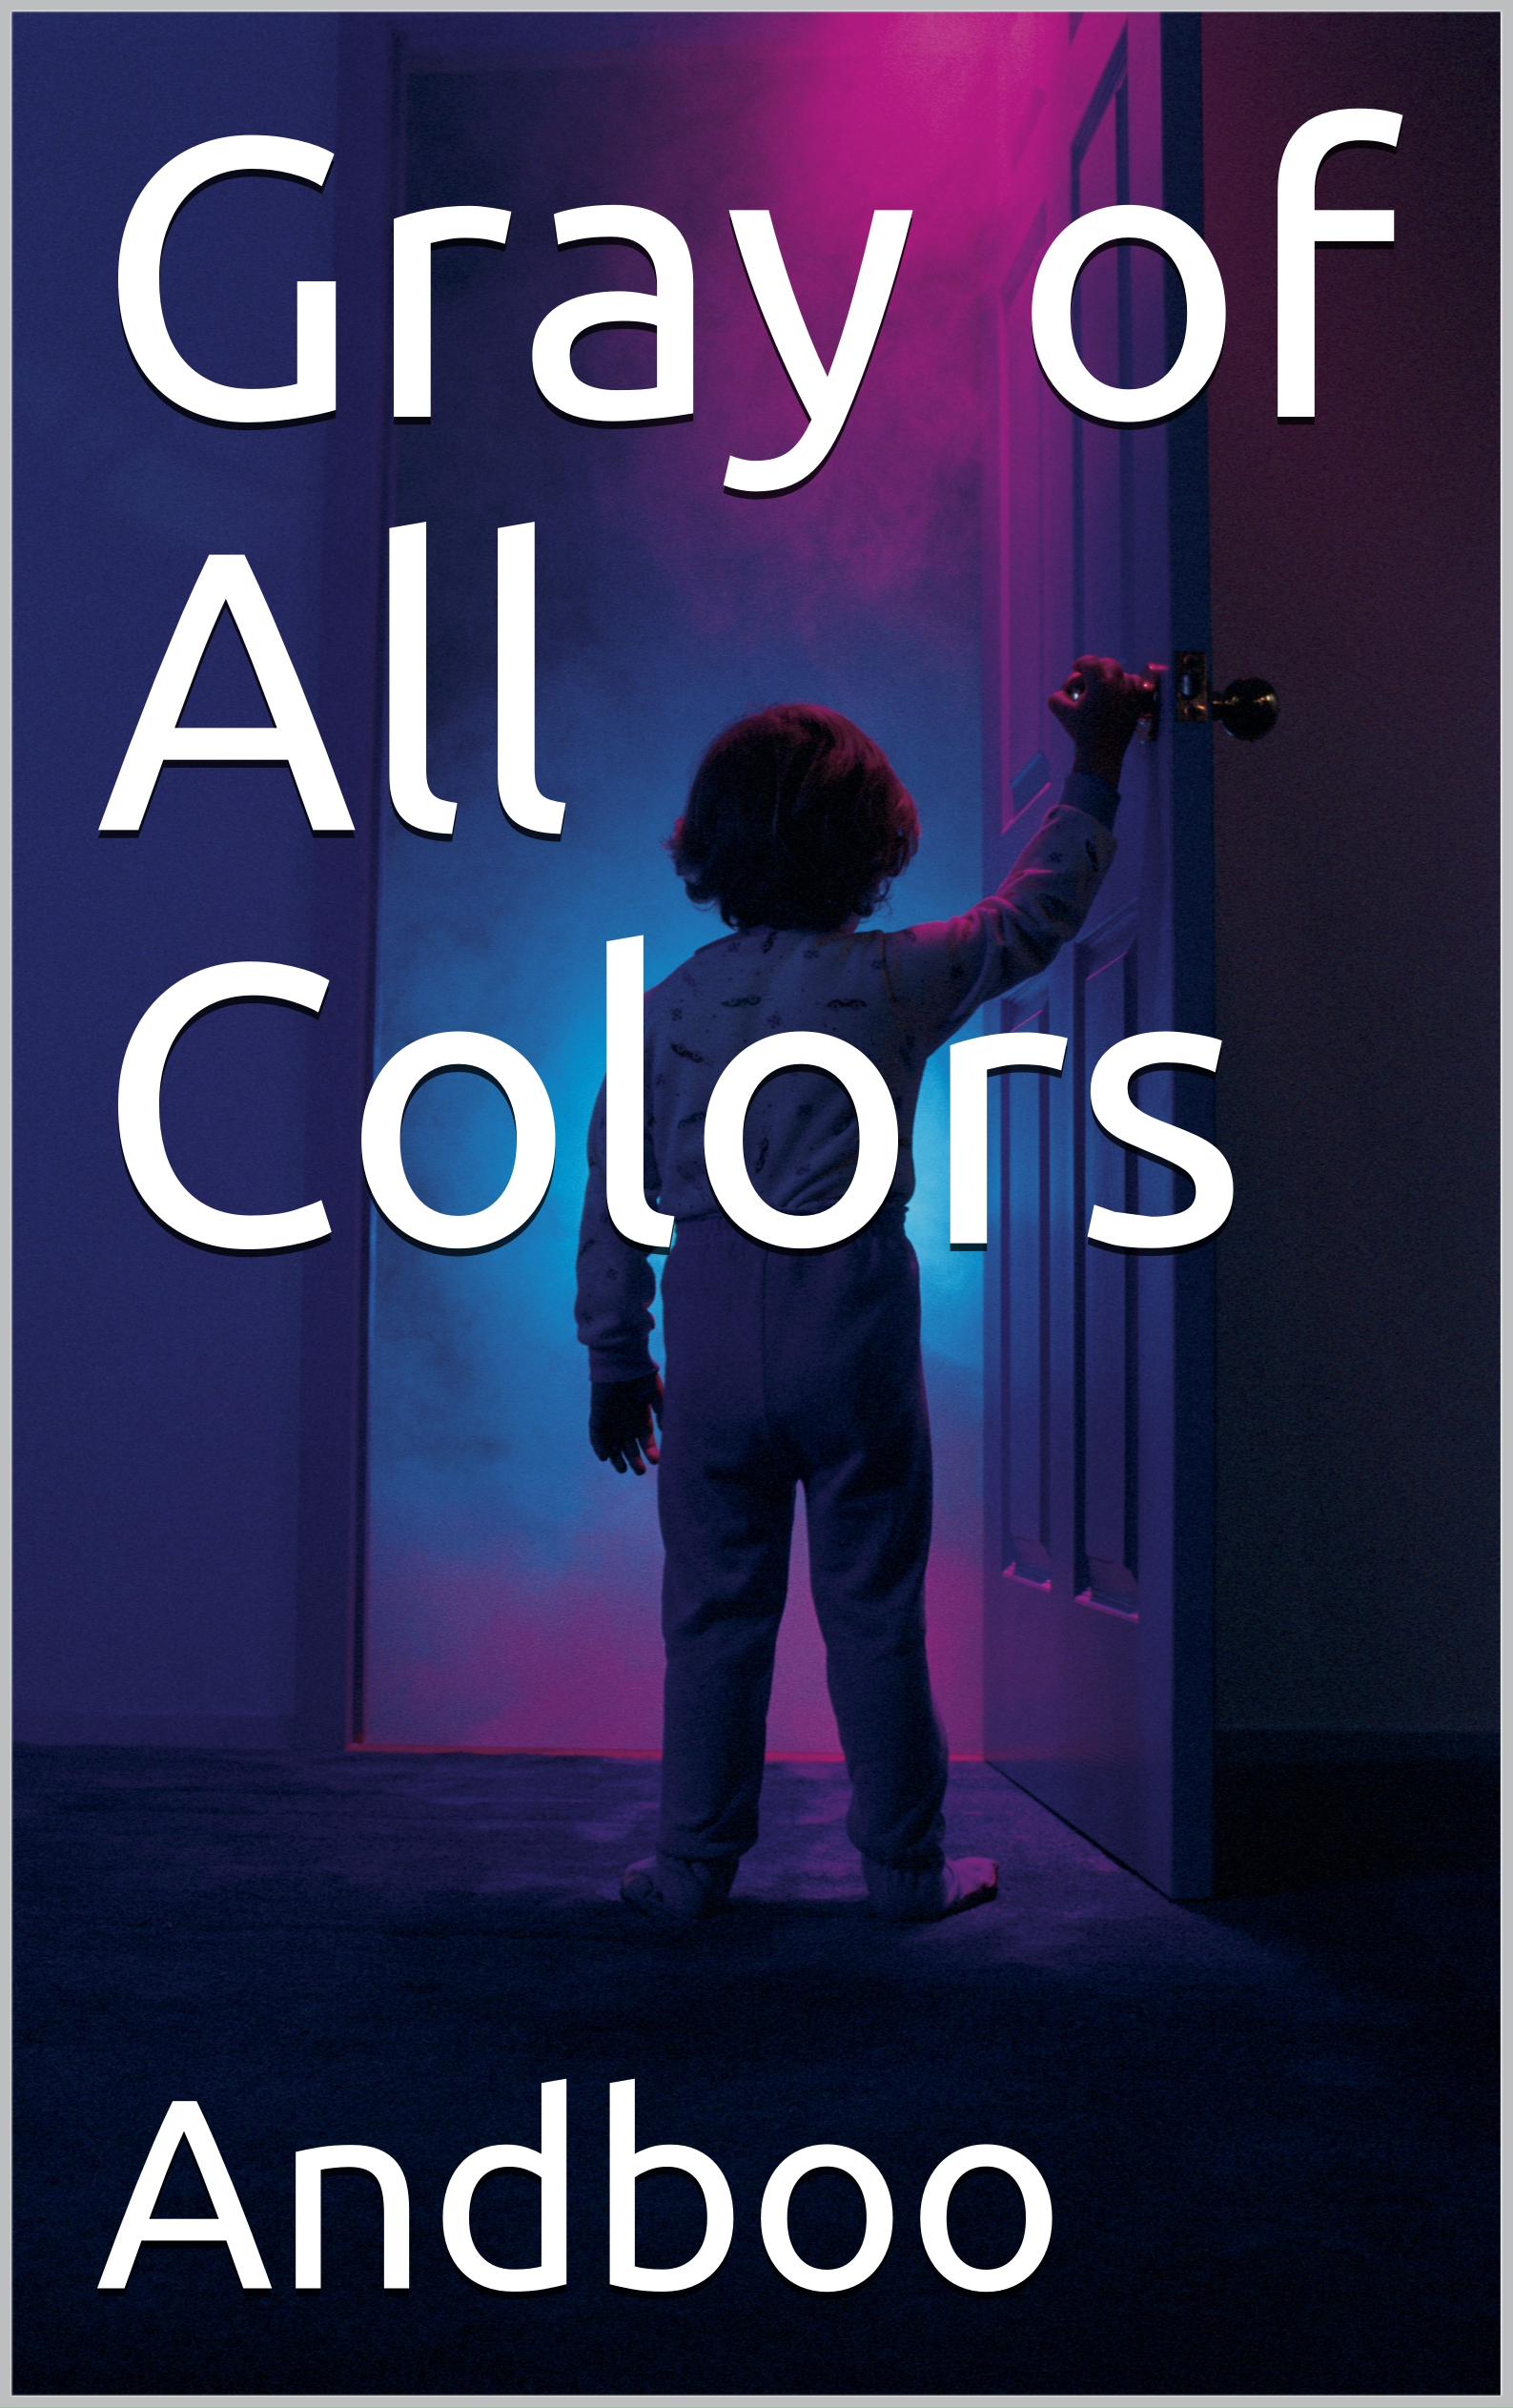 FREE: Gray of All Colors by Andboo